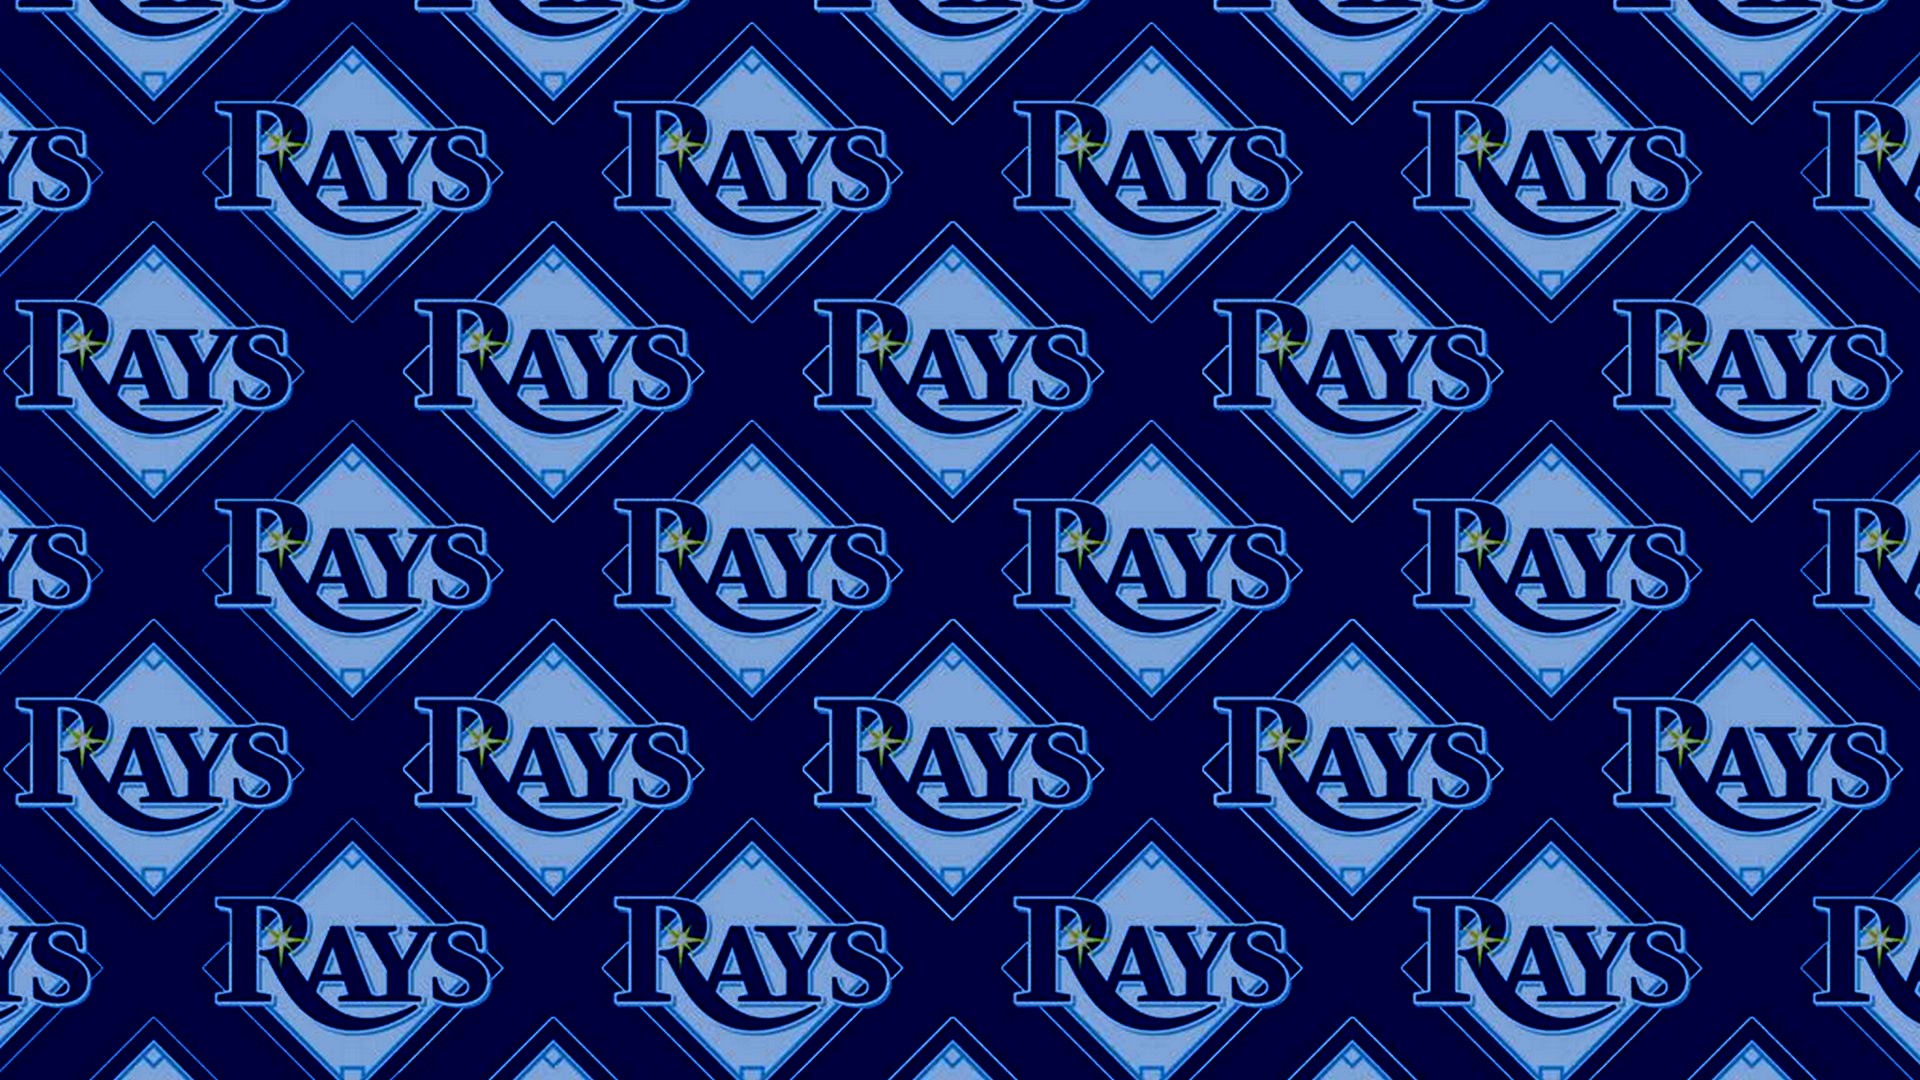 Tampa Bay Rays Wallpaper HD with high-resolution 1920x1080 pixel. You can use this wallpaper for Mac Desktop Wallpaper, Laptop Screensavers, Android Wallpapers, Tablet or iPhone Home Screen and another mobile phone device